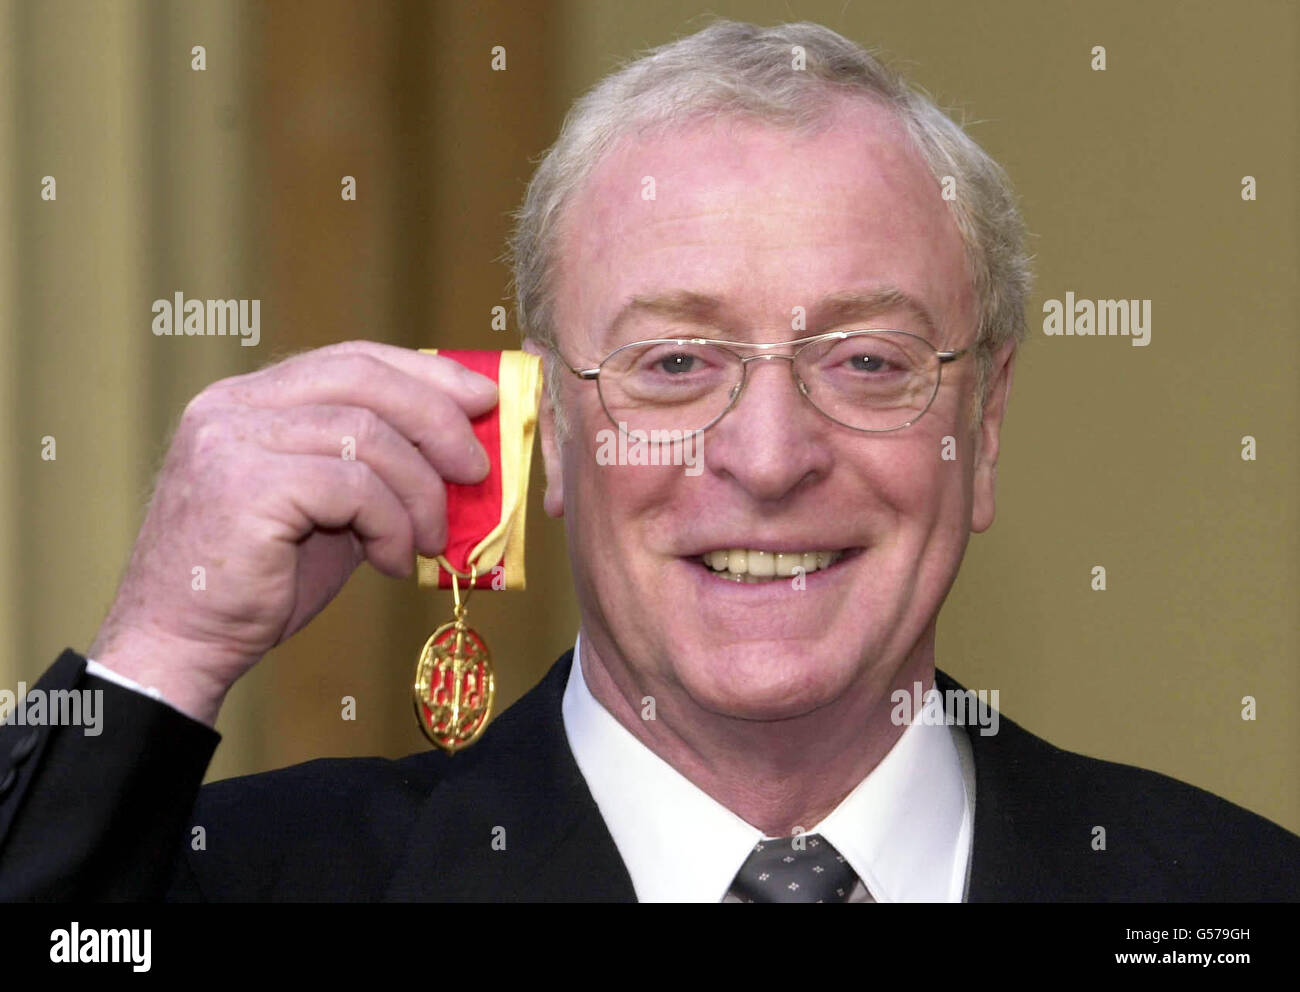 Actor Michael Caine at Buckingham Palace in London, after receiving a knighthood from Britain's Queen Elizabeth II. Knighted as Sir Maurice Micklewhite - his real name. *...the Bermondsey-born son of a Billingsgate fish porter and London charwoman remains a prolific movie actor whose portrayals include the bespectacled Harry Palmer in the Len Deighton spy thrillers, Cockney Lothario Alfie Elkins in Alfie, and Charlie Croker in The Italian Job. Stock Photo